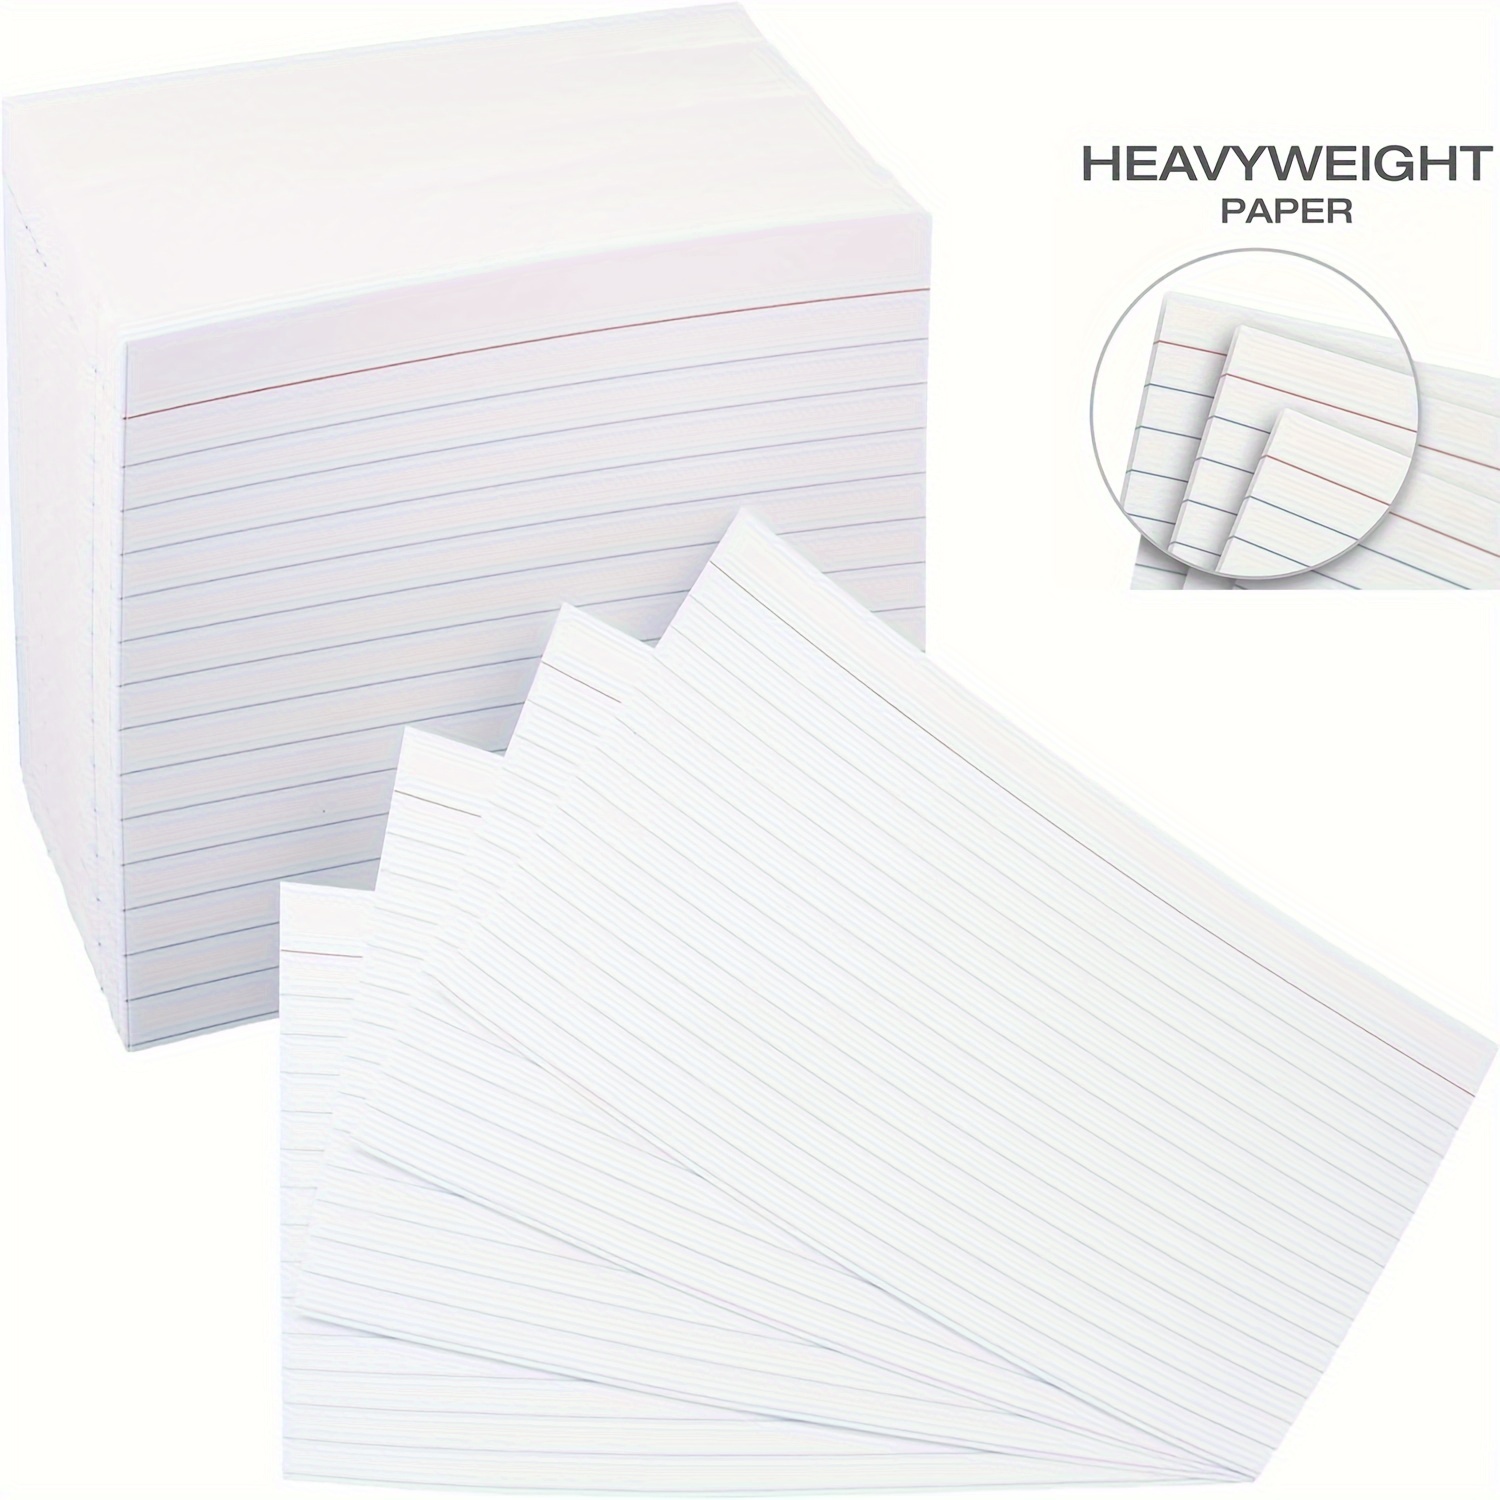 Blank Index Cards 4x6 White 100 Pack